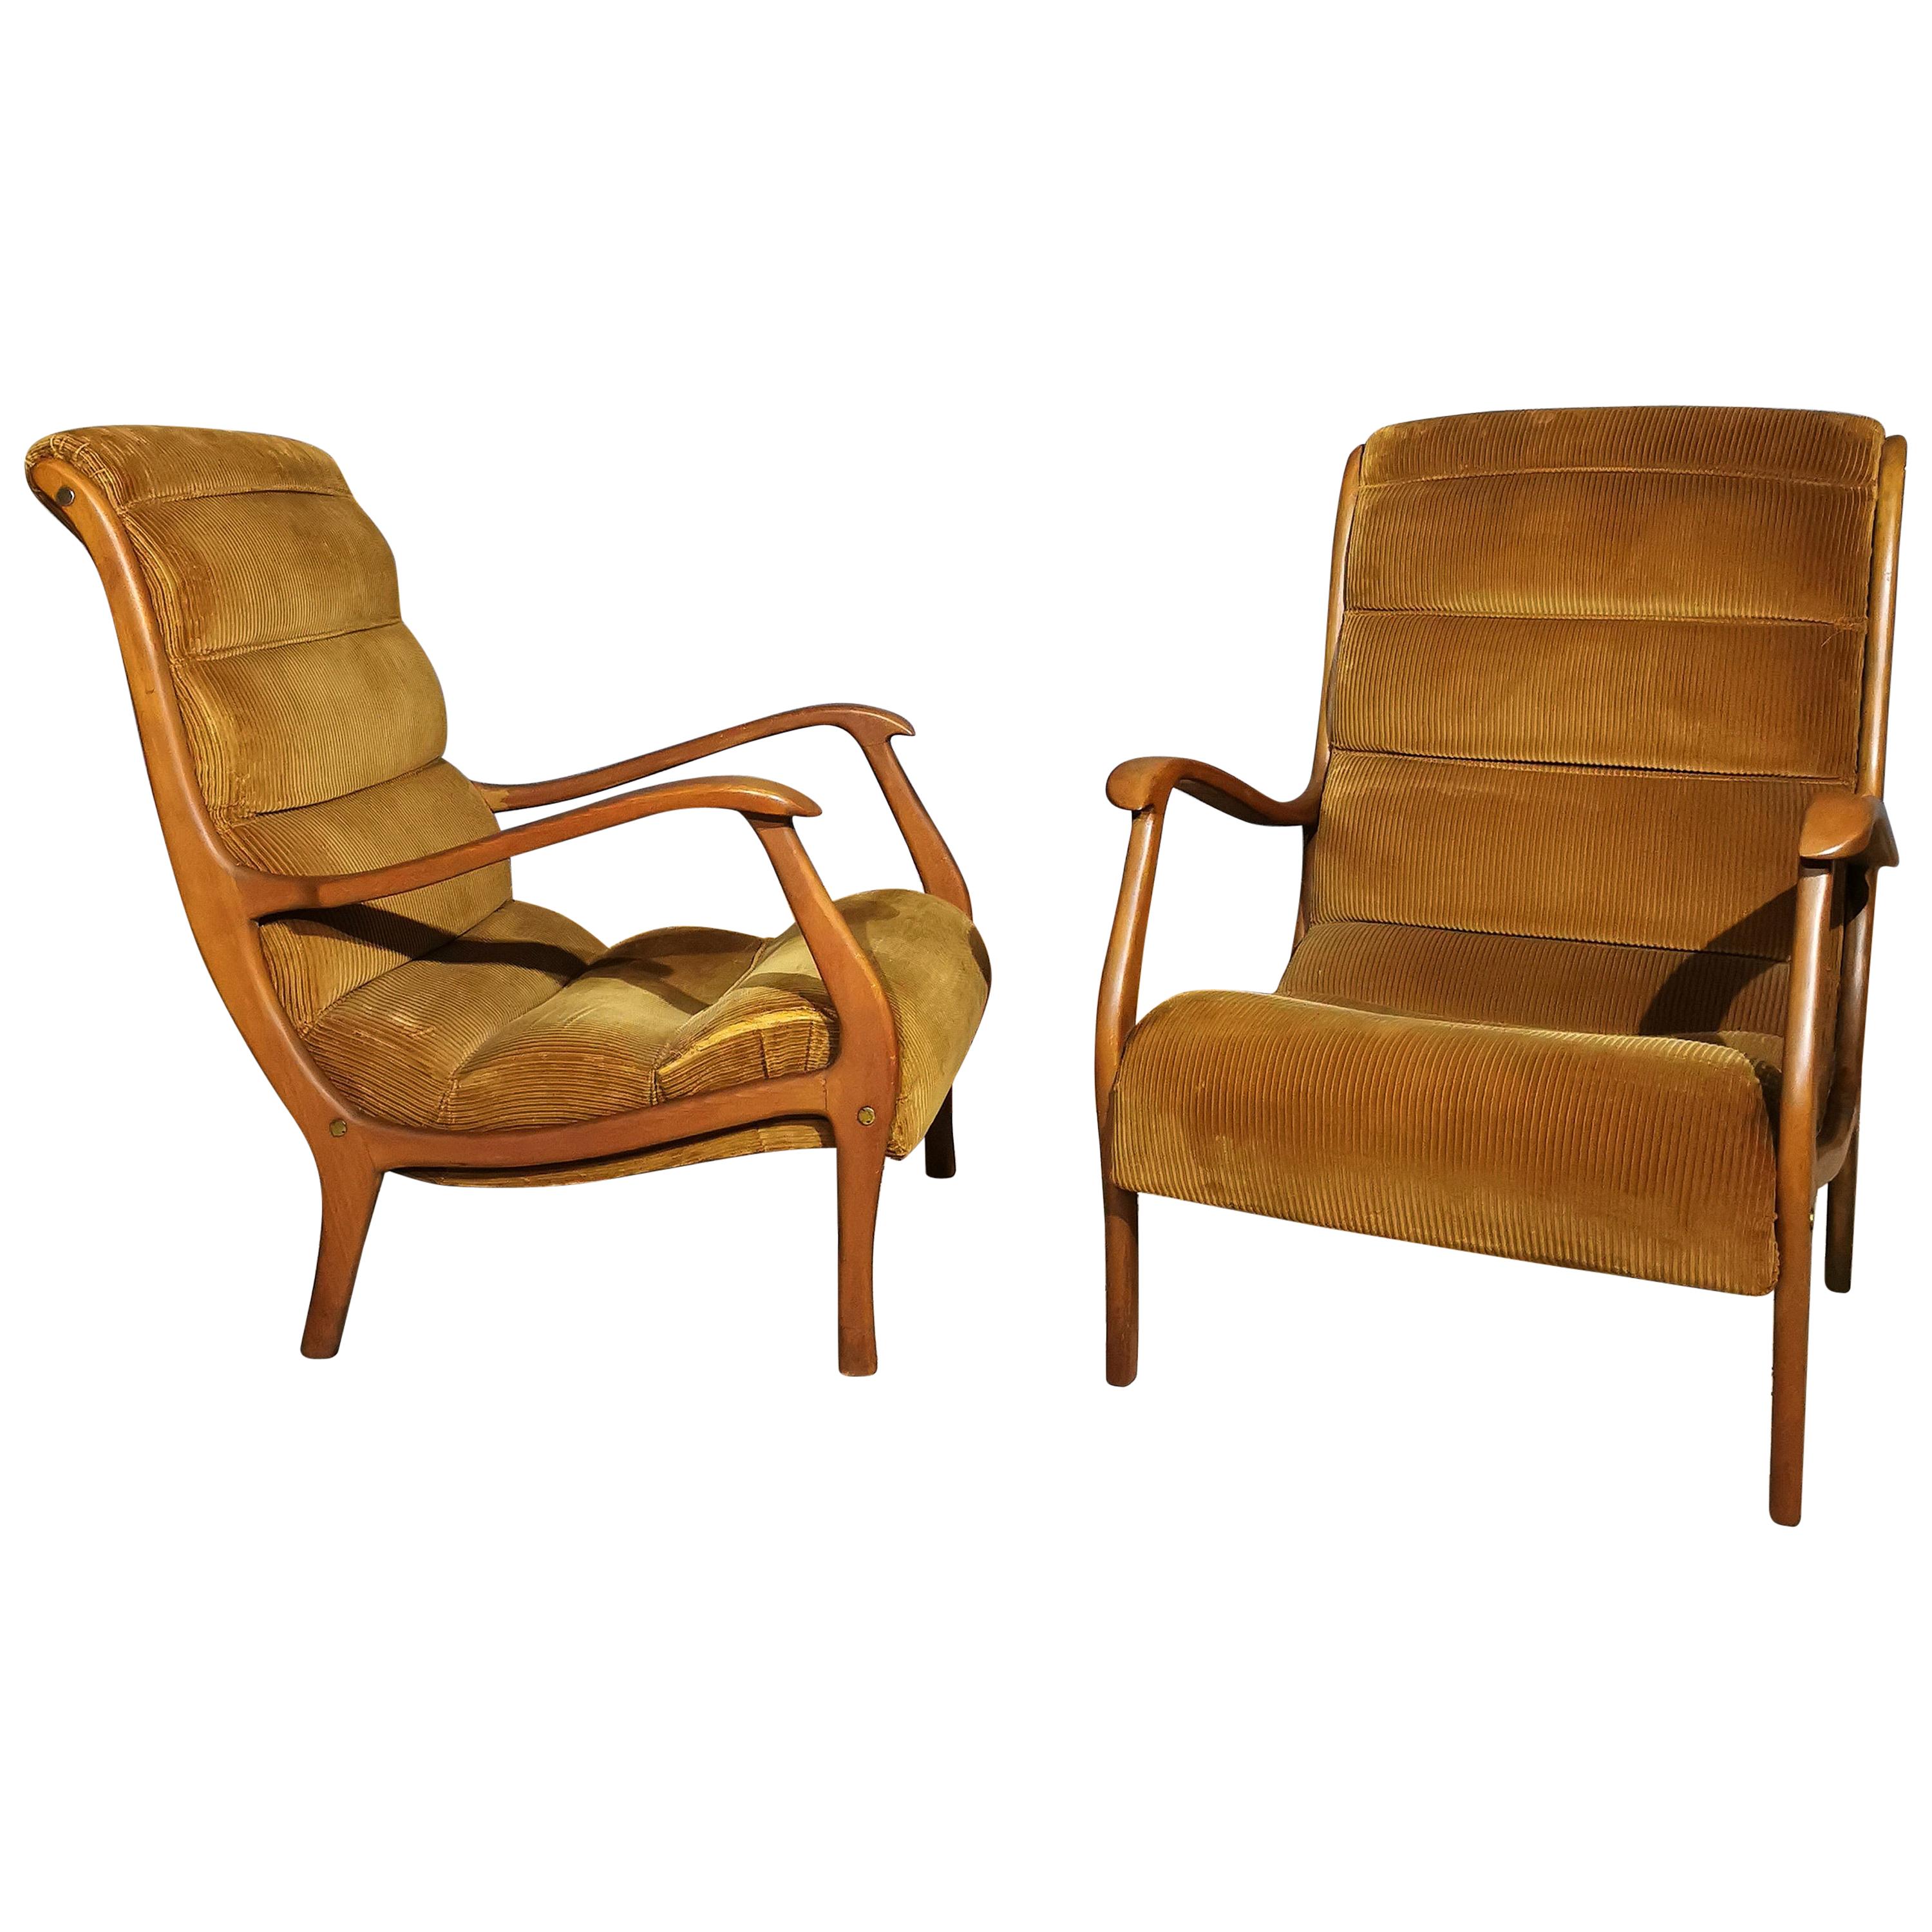 Armchairs Midcentury by Ezio Loghi for Elam, Velvet and Wood, Italy